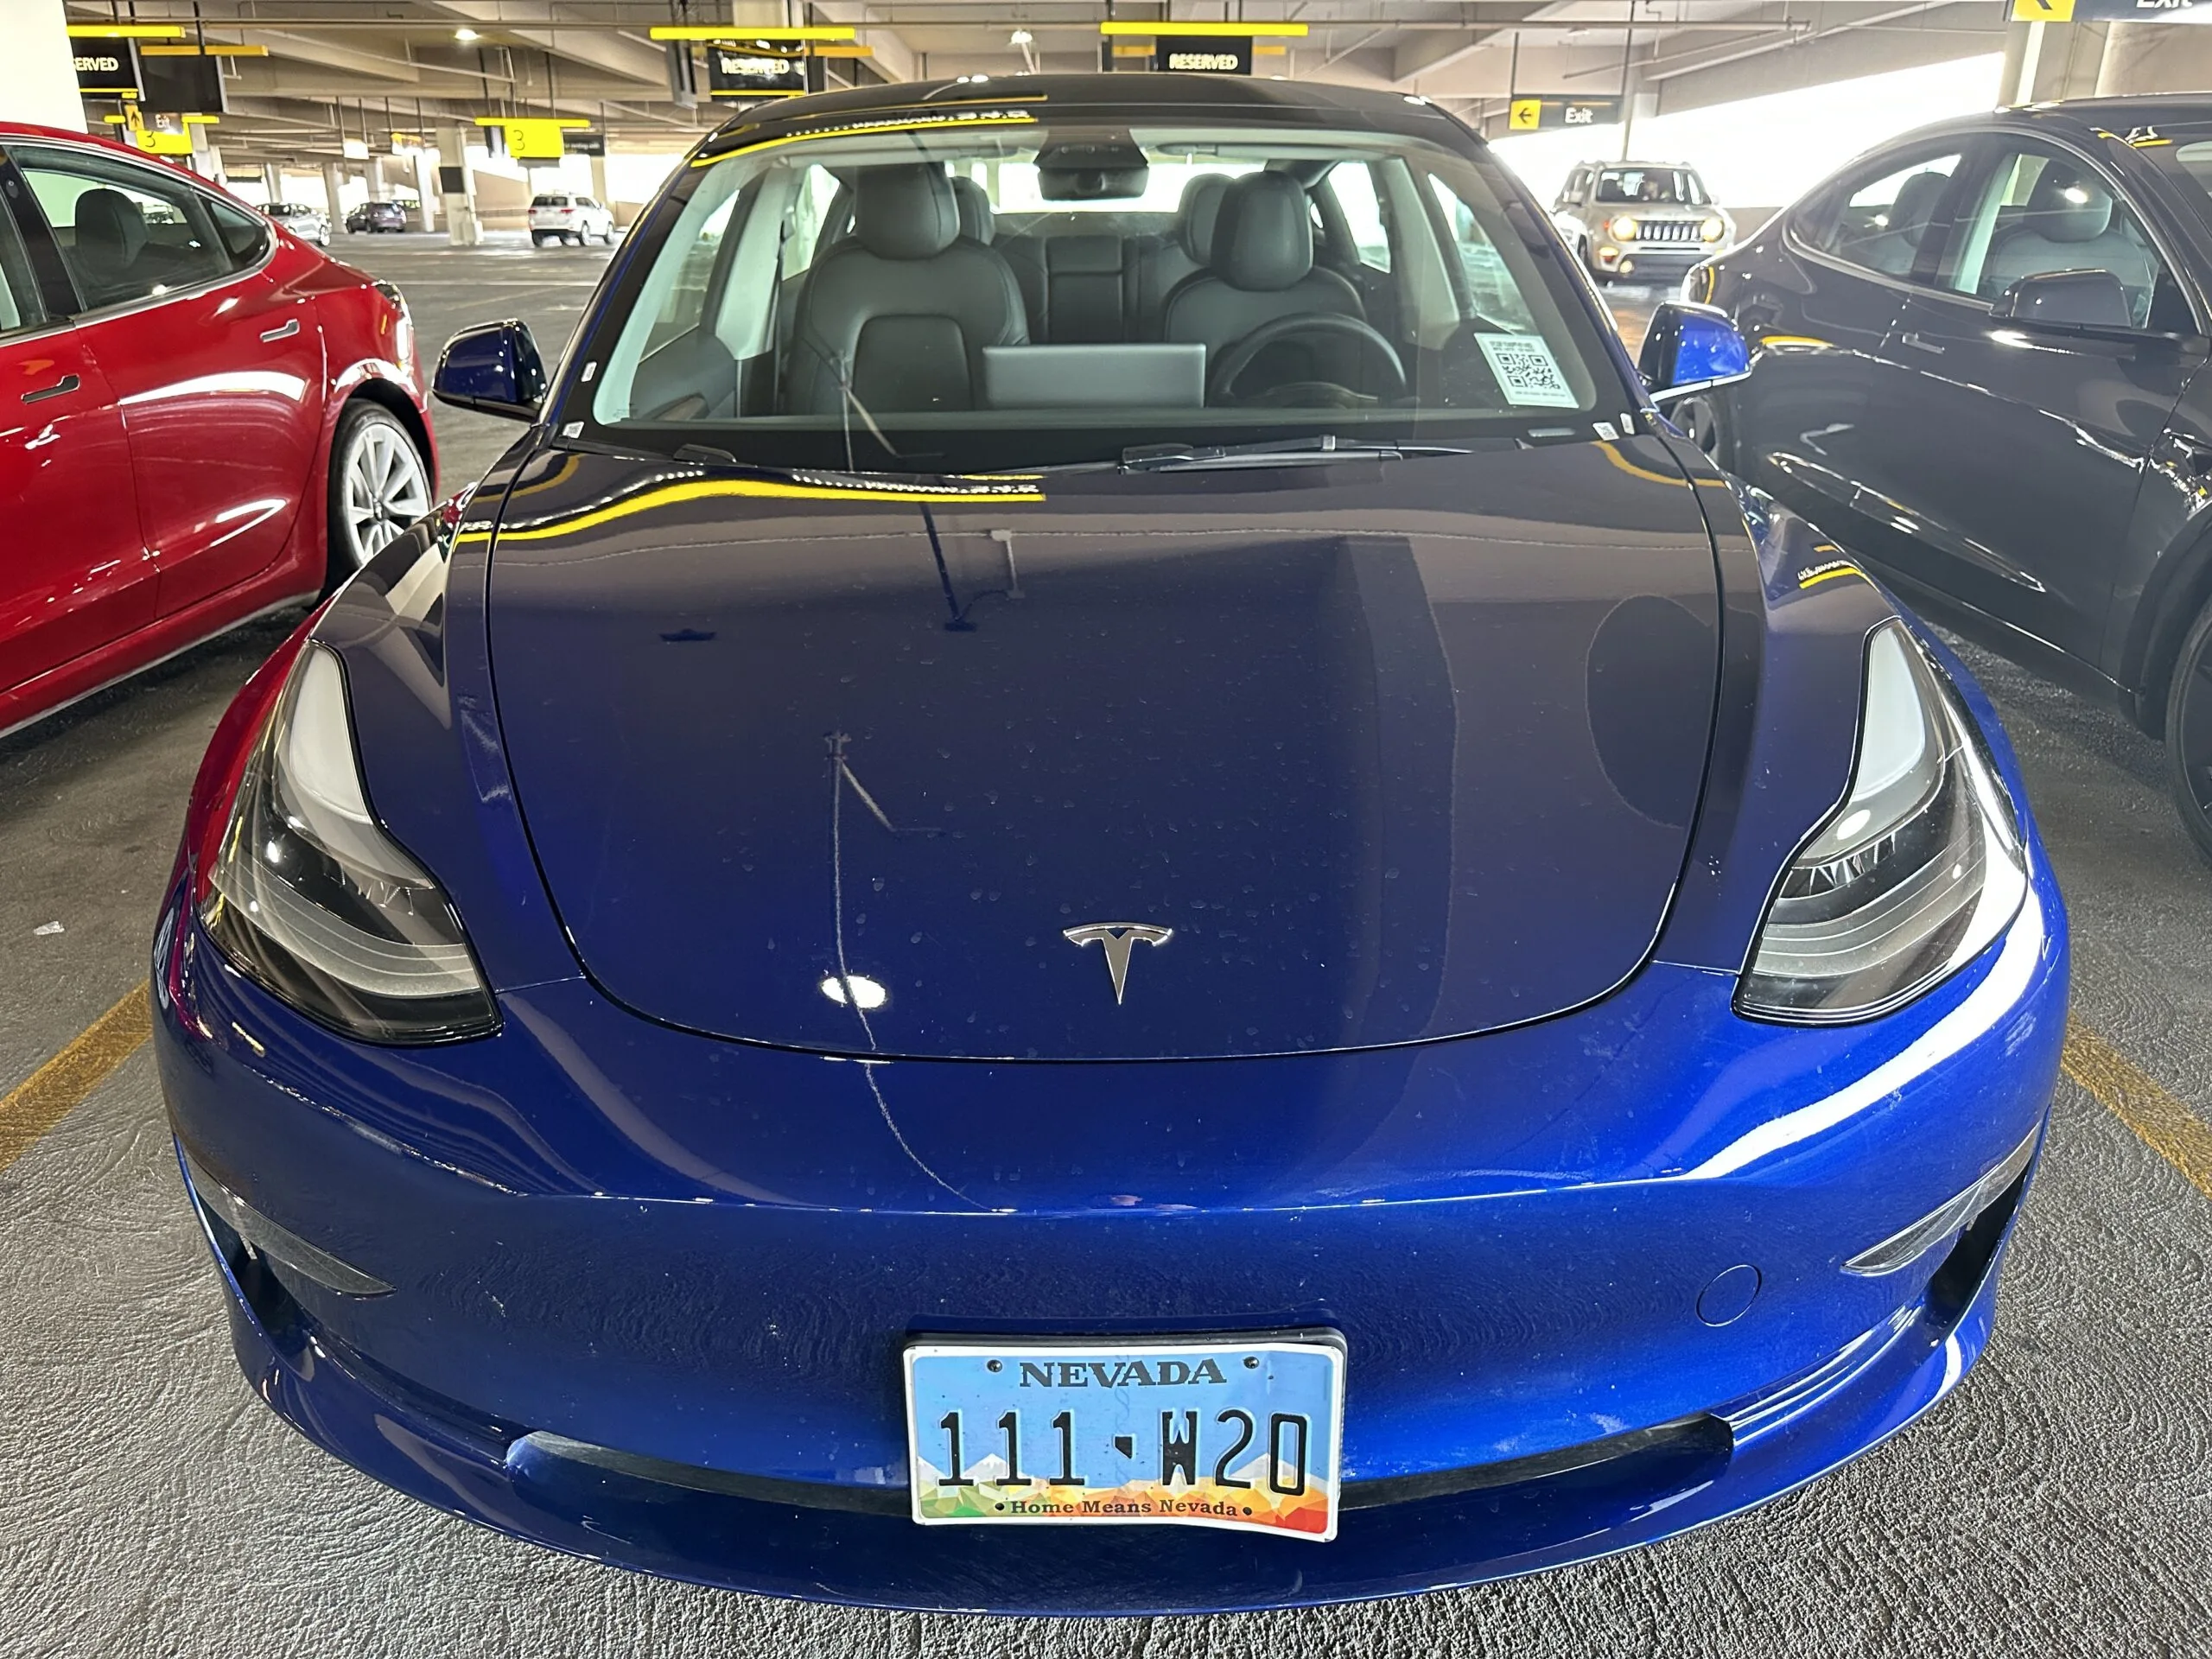 A blue Tesla Model 3 is photographed from head on.